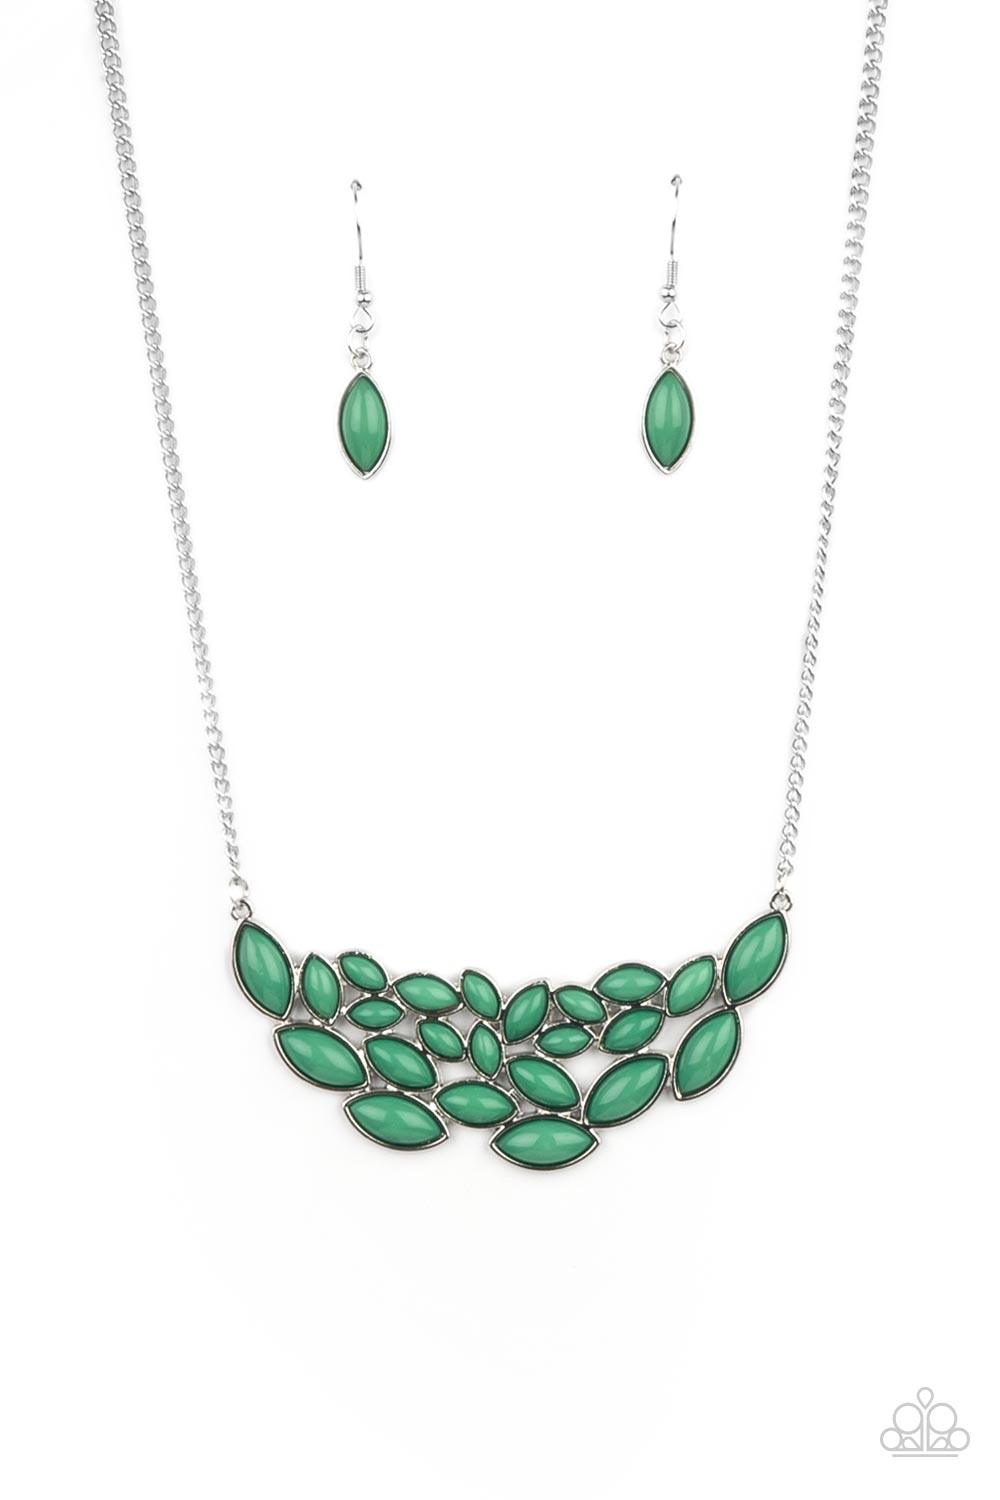 Paparazzi Accessories Eden Escape - Green Encased in sleek silver frames, a collection of marquise shaped Mint beads delicately coalesce into a leafy pendant below the collar for a whimsical pop of color. Features an adjustable clasp closure. Sold as one